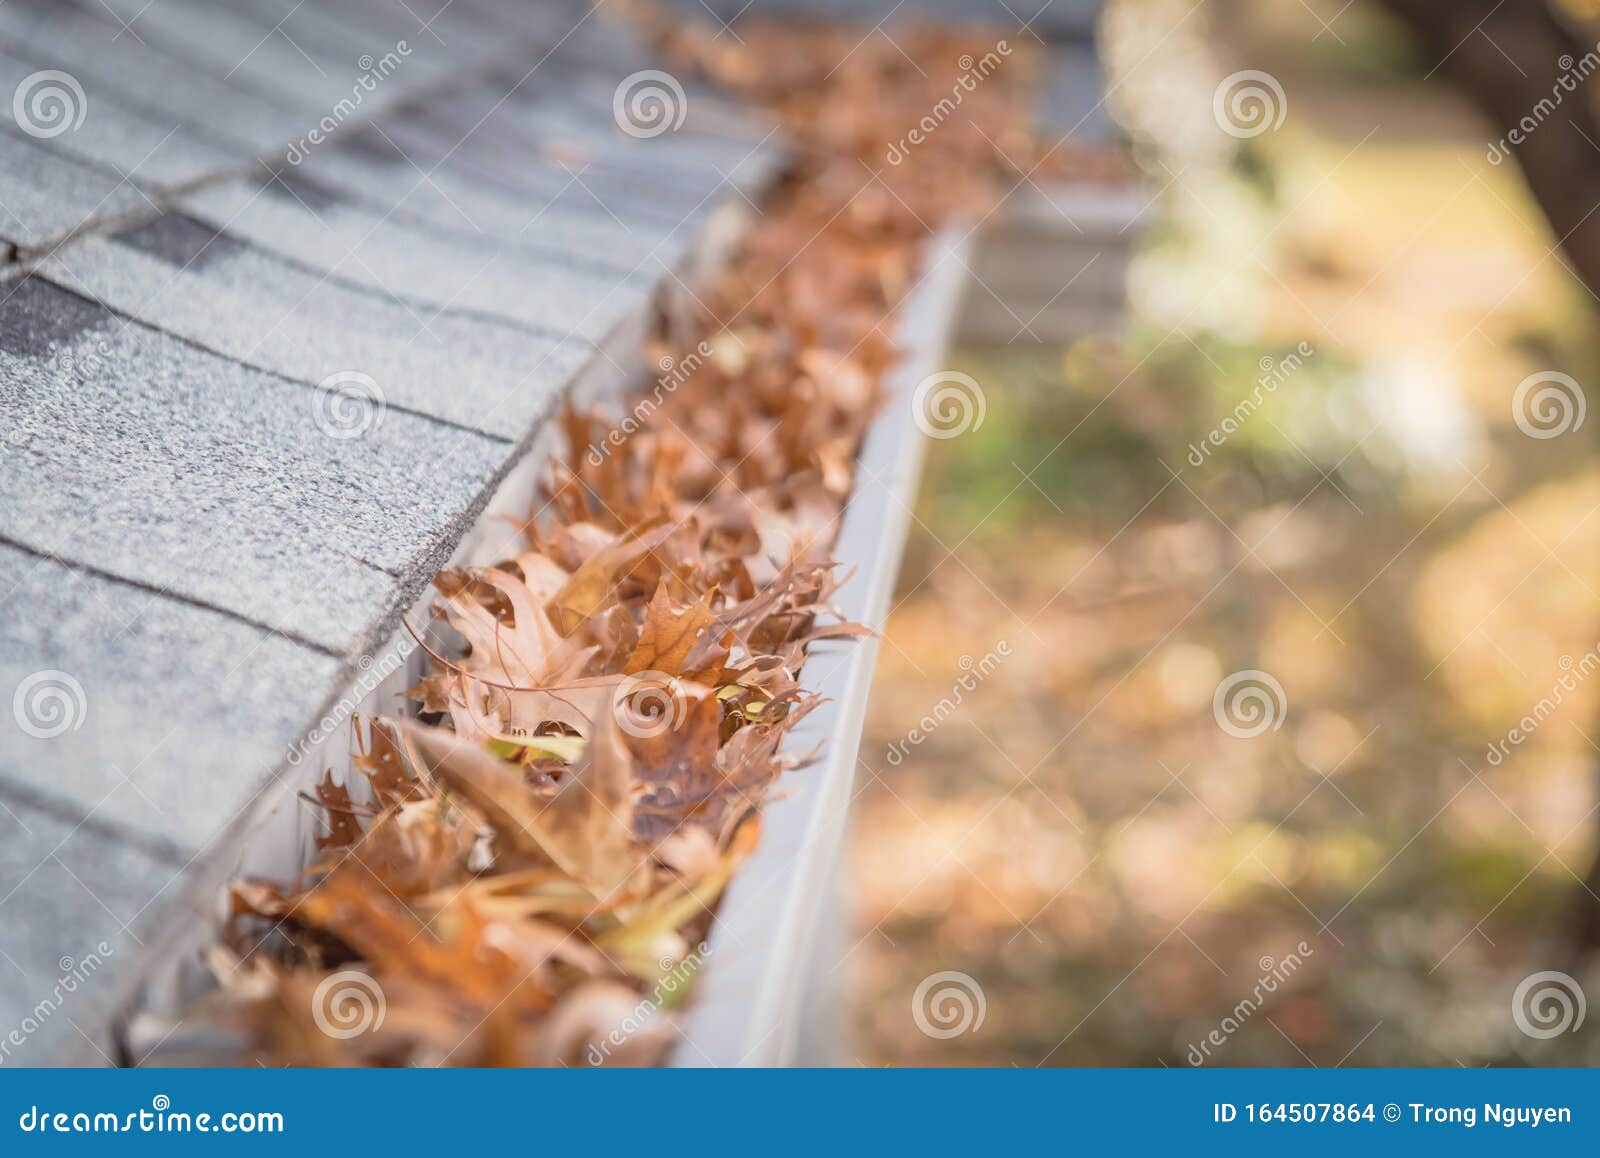 shallow dof clogged gutter near roof shingles of residential house full of dried leaves